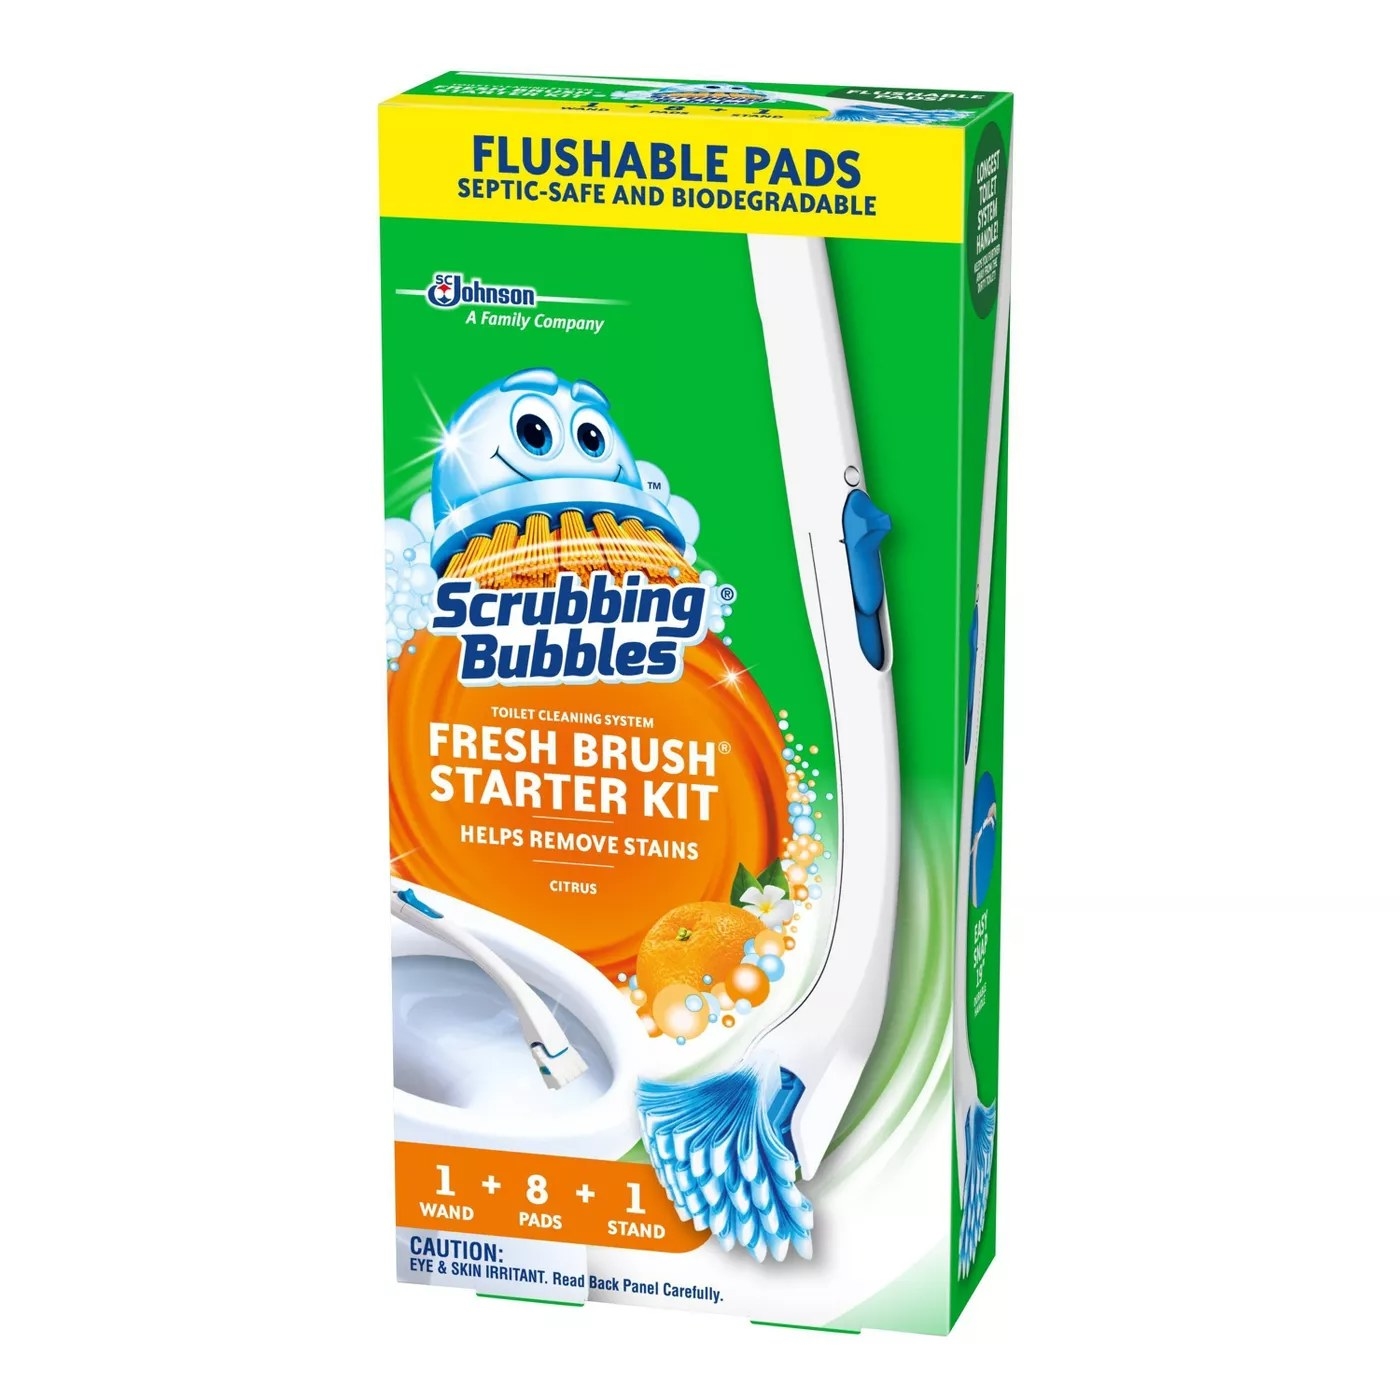 A Scrubbing Bubbles toilet cleaning system fresh brush starter kit that helps remove stains with one wand, eight citrus-scented pads, and one stand